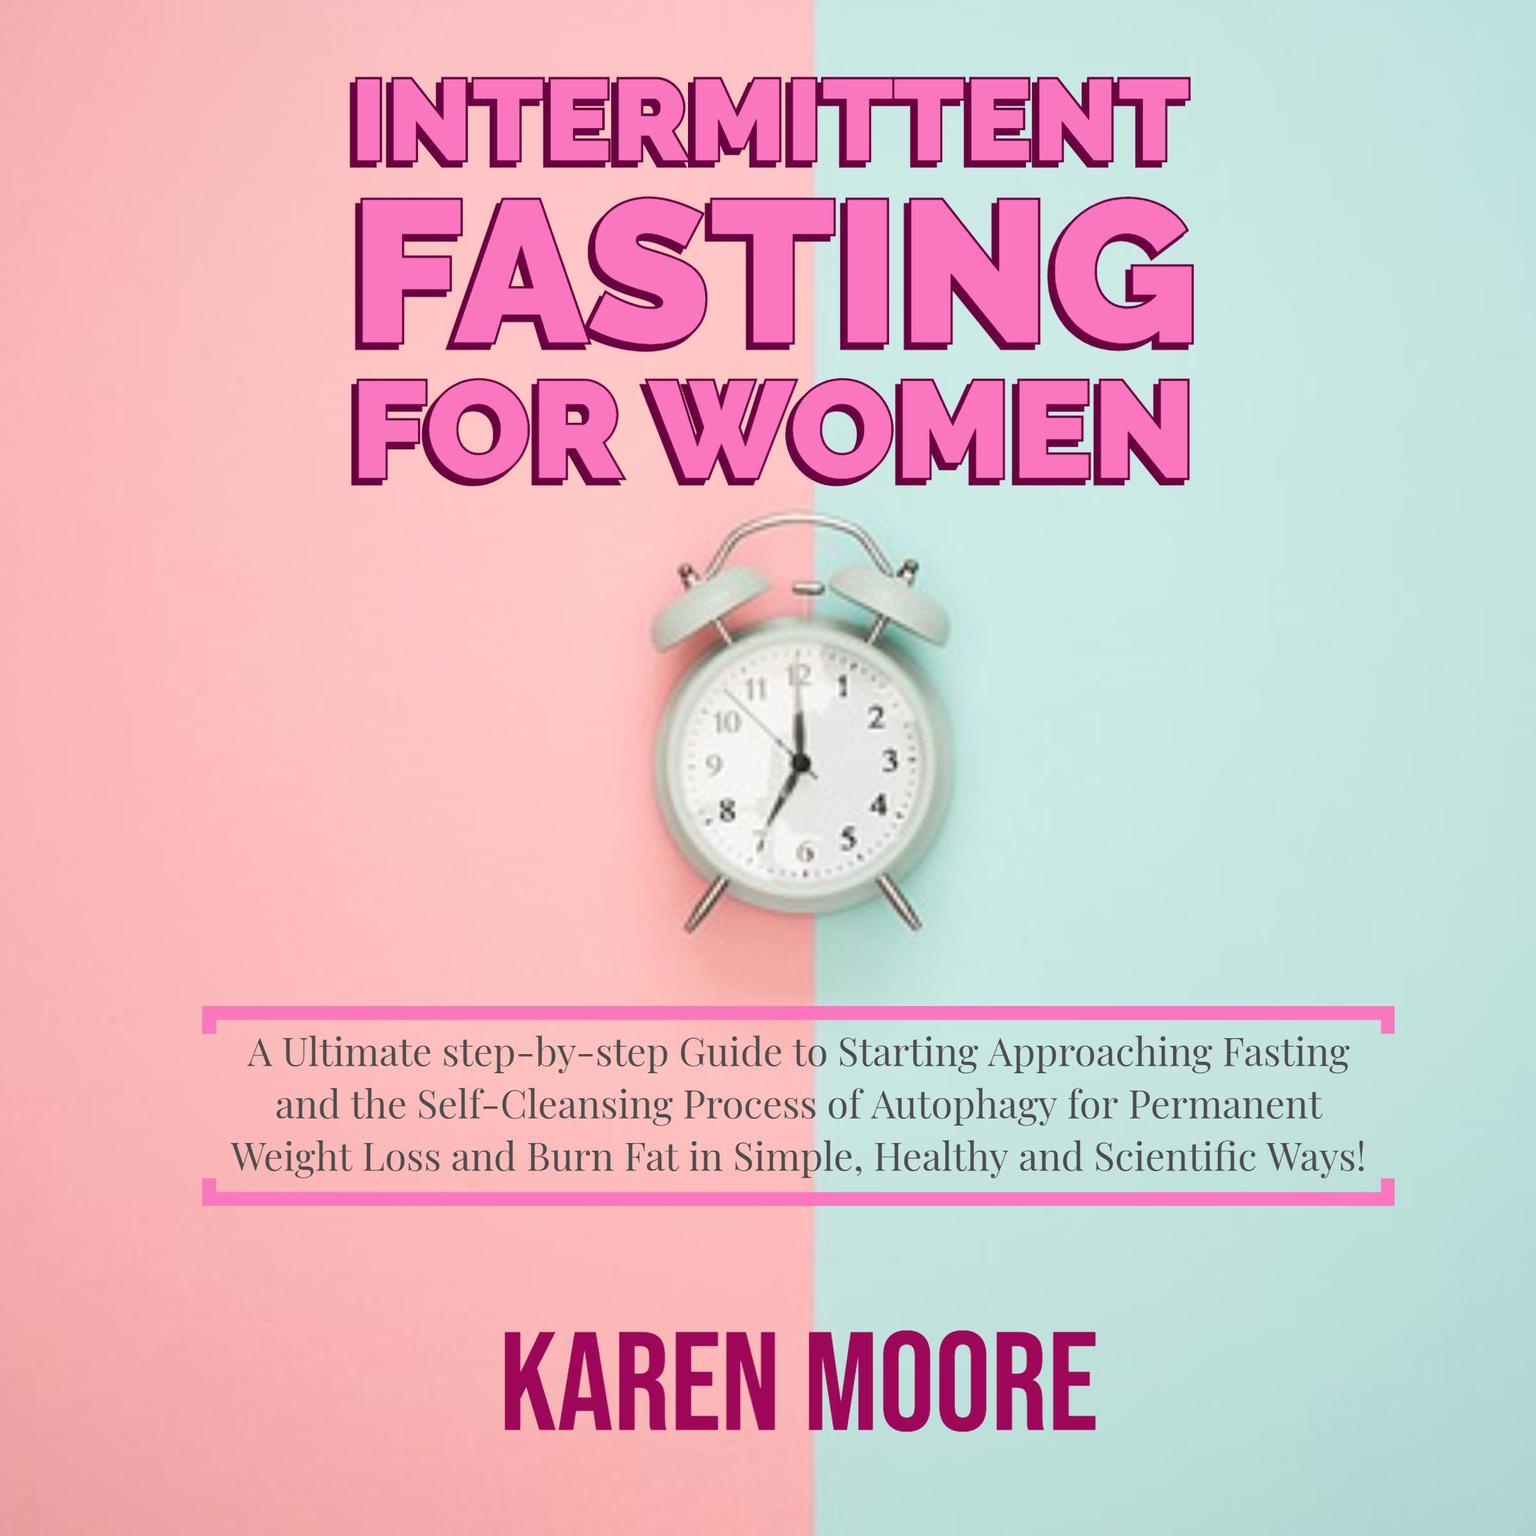 Intermittent Fasting For Women: A Ultimate step-by-step Guide to Starting Approaching Fasting and the Self-Cleansing Process of Autophagy for Permanent Weight Loss and Burn Fat in Simple, Healthy and Scientific Ways! Audiobook, by Karen Moore